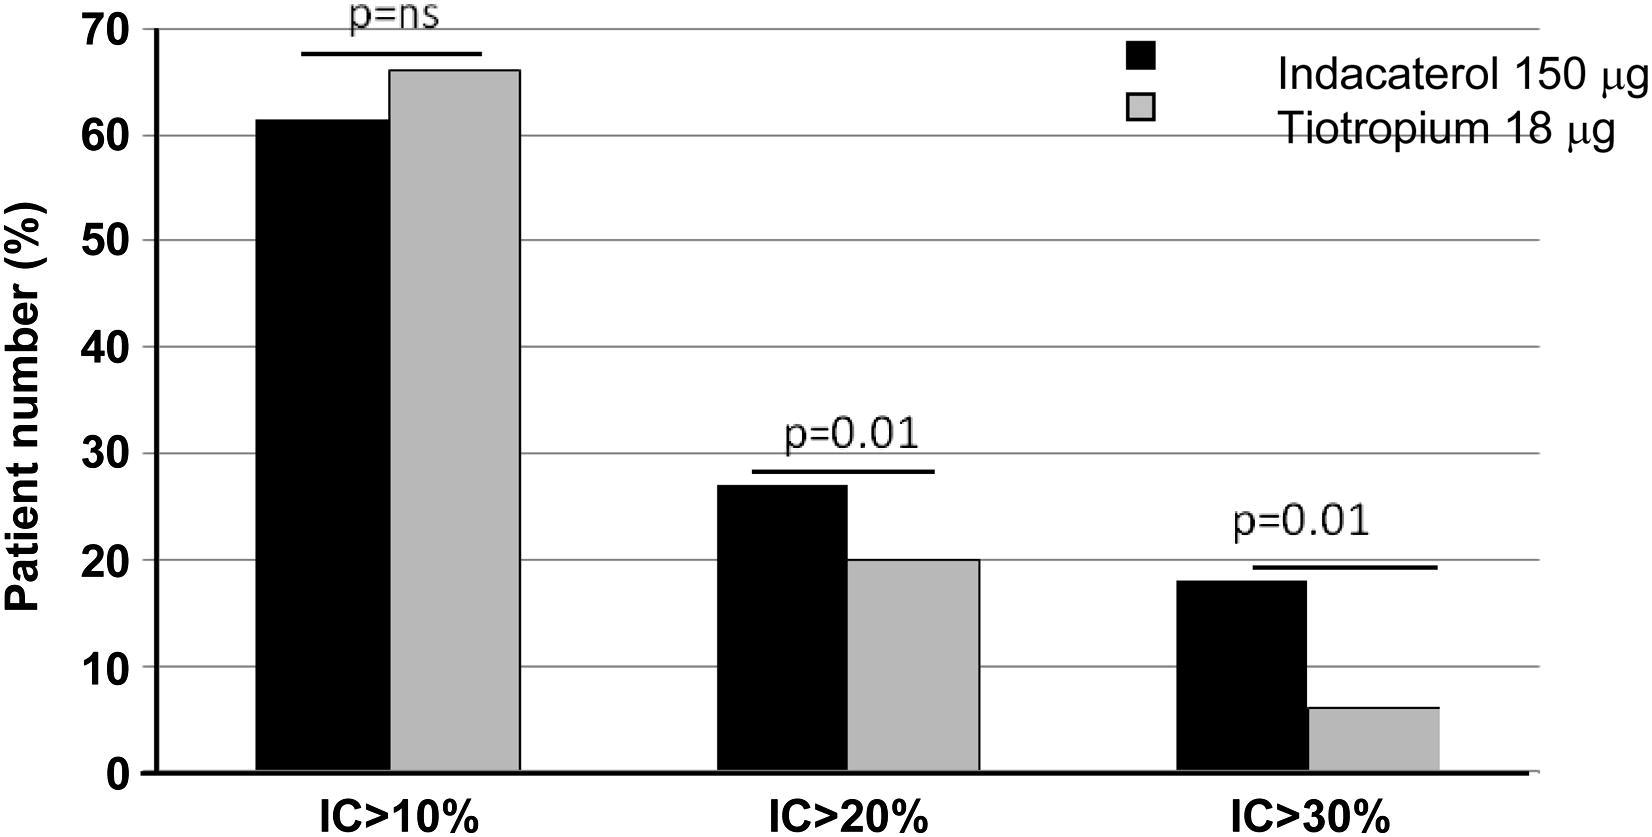 Acute effects of indacaterol on lung hyperinflation in moderate COPD: a comparison with tiotropium